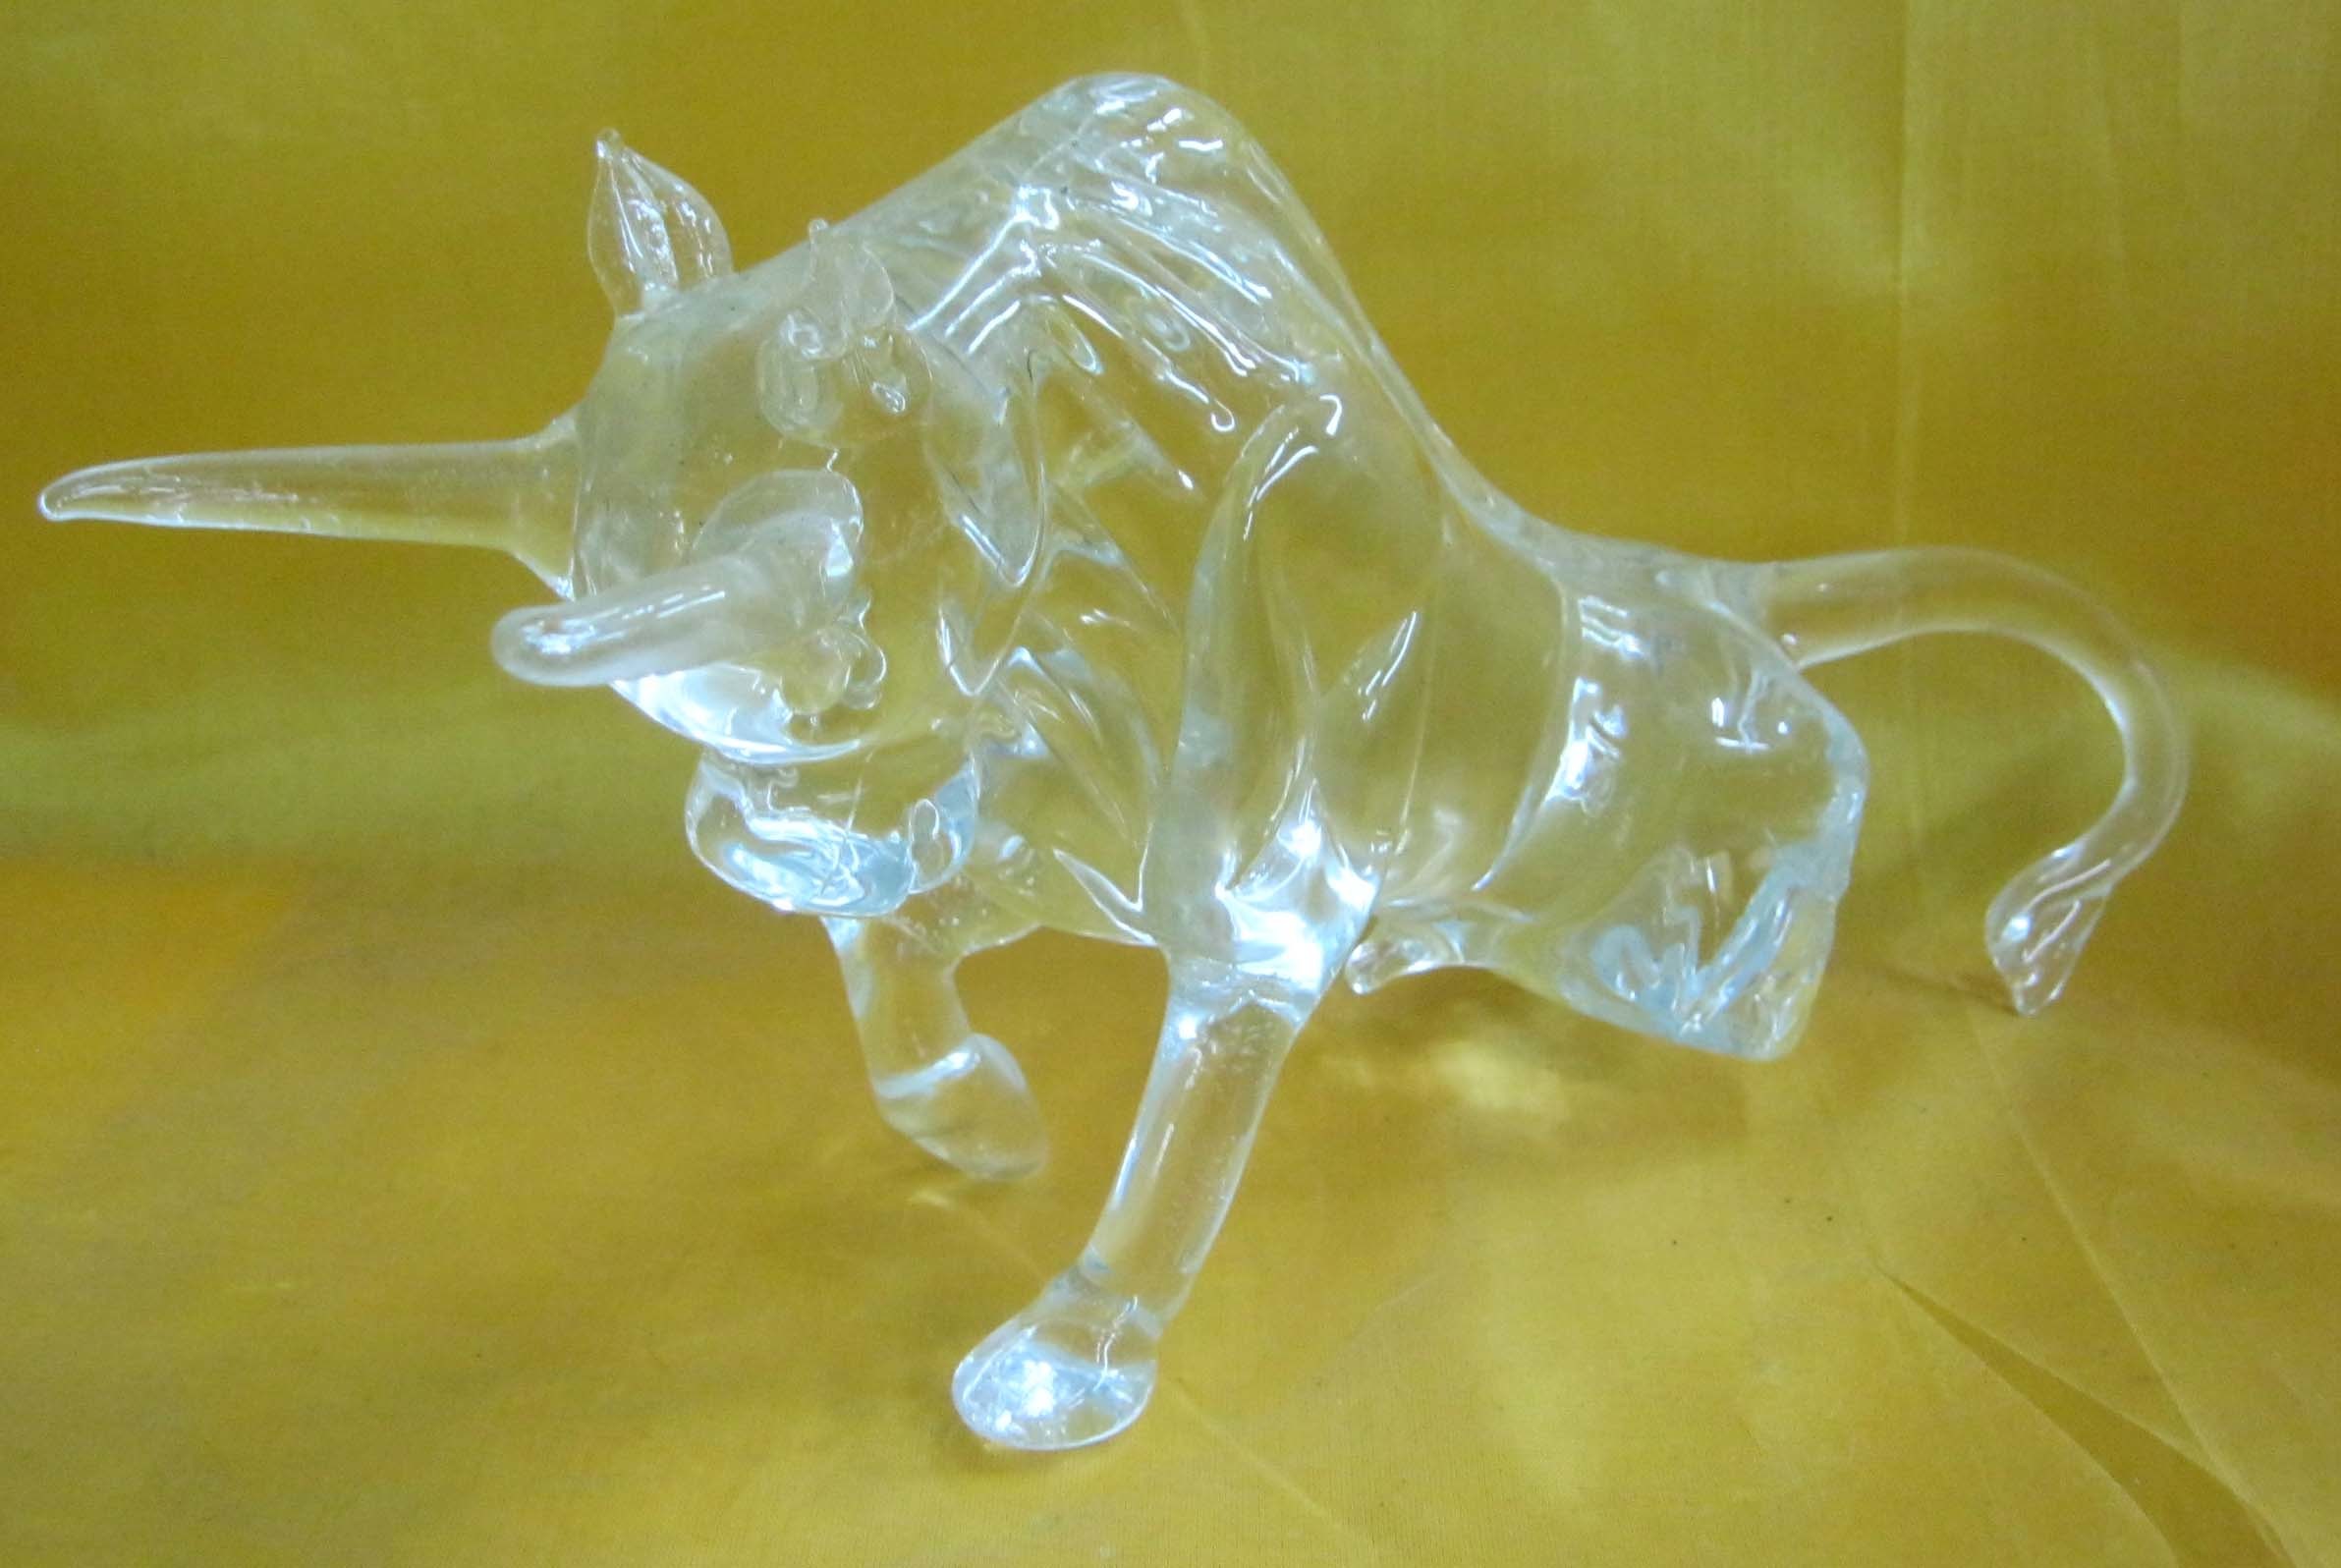 Chinese Zodiac Animal for Business Gifts or Table Decoration